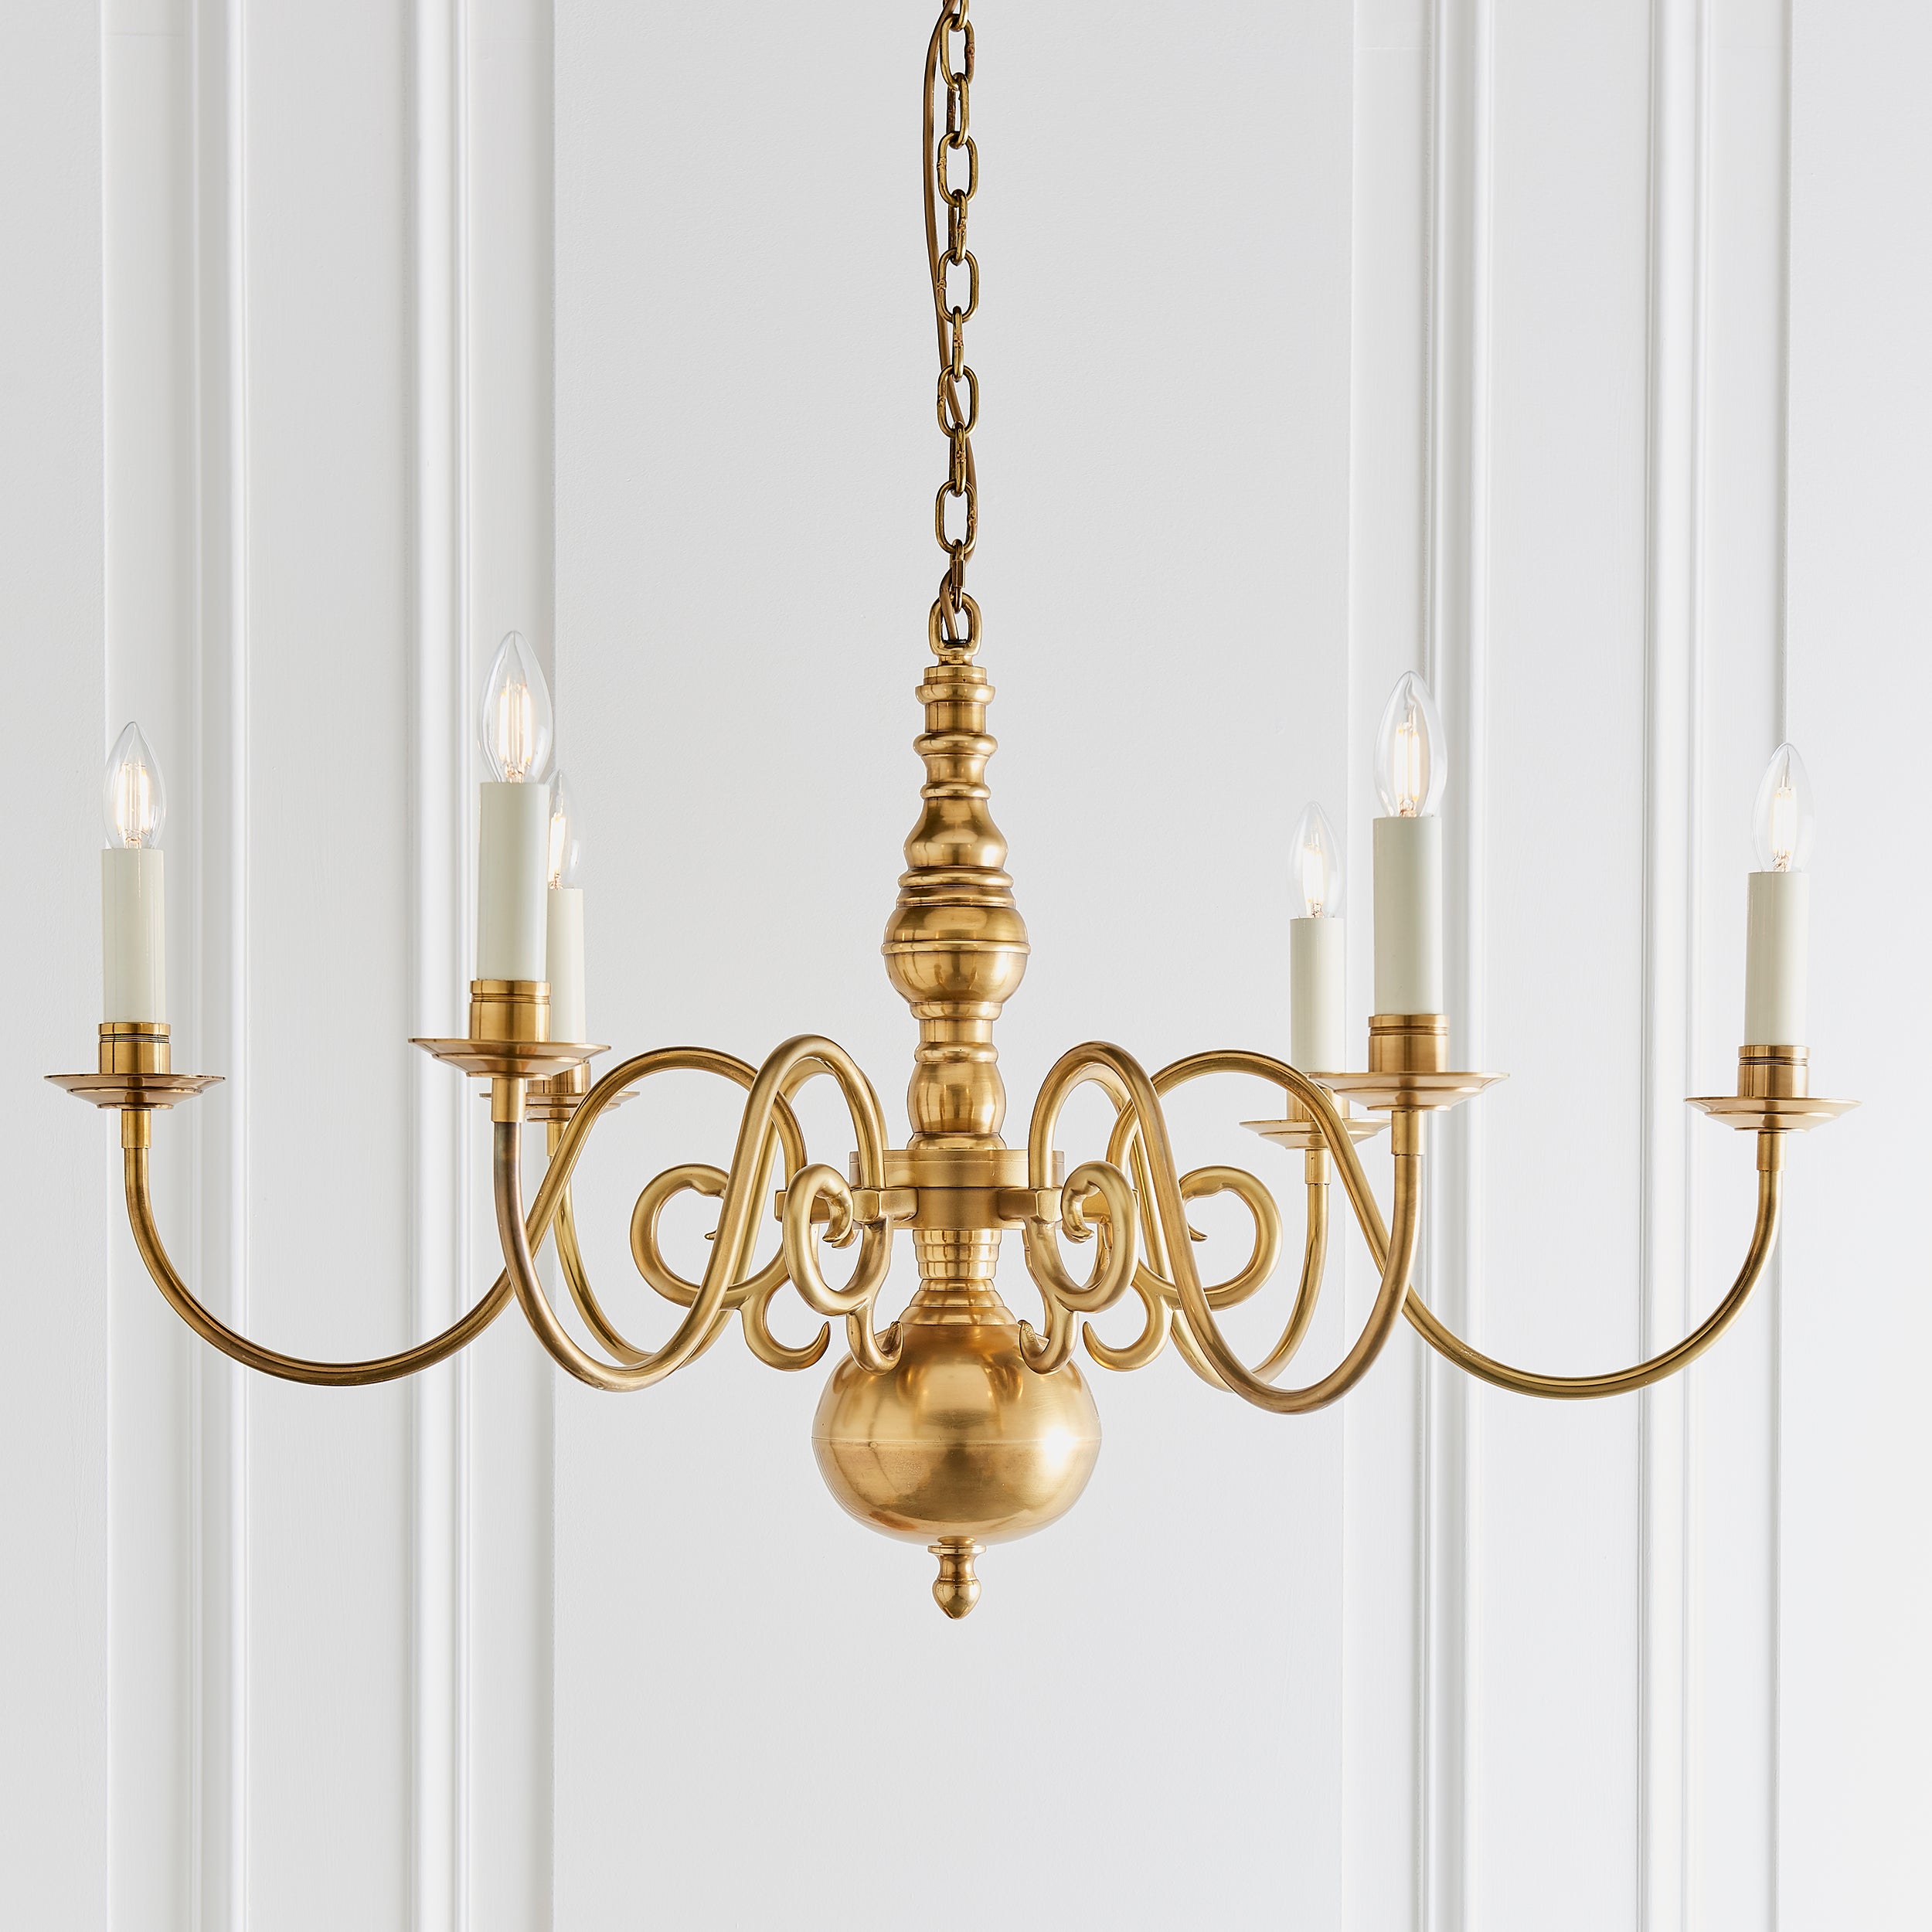 Chamberlain 12 Light Solid Brass Candle Chandelier – Lush Chandeliers